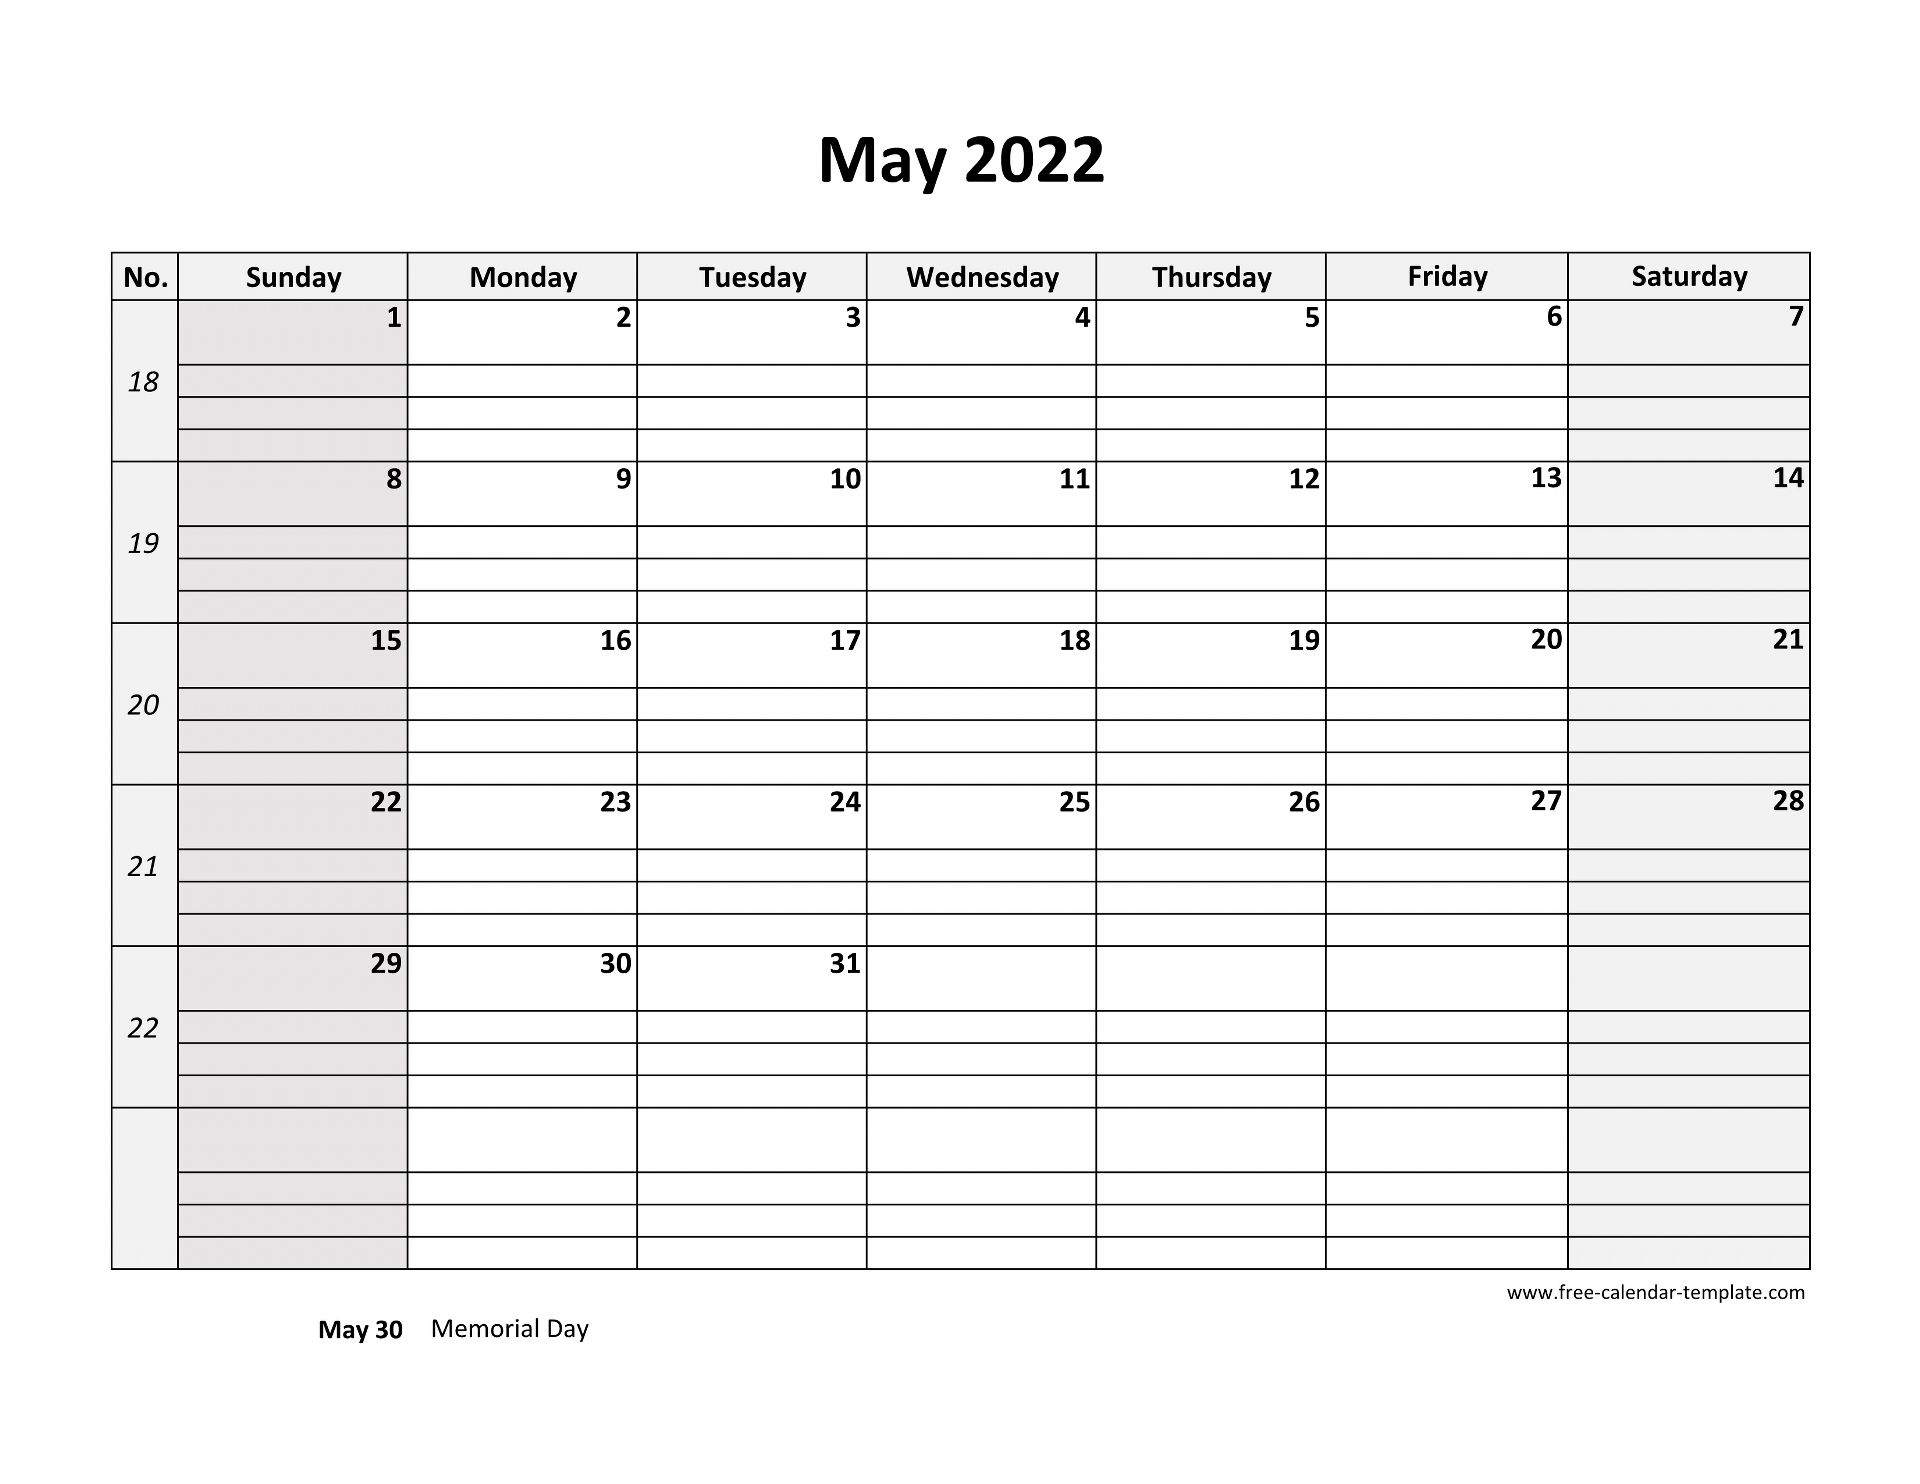 May 2022 Calendar Free Printable with grid lines designed (horizontal